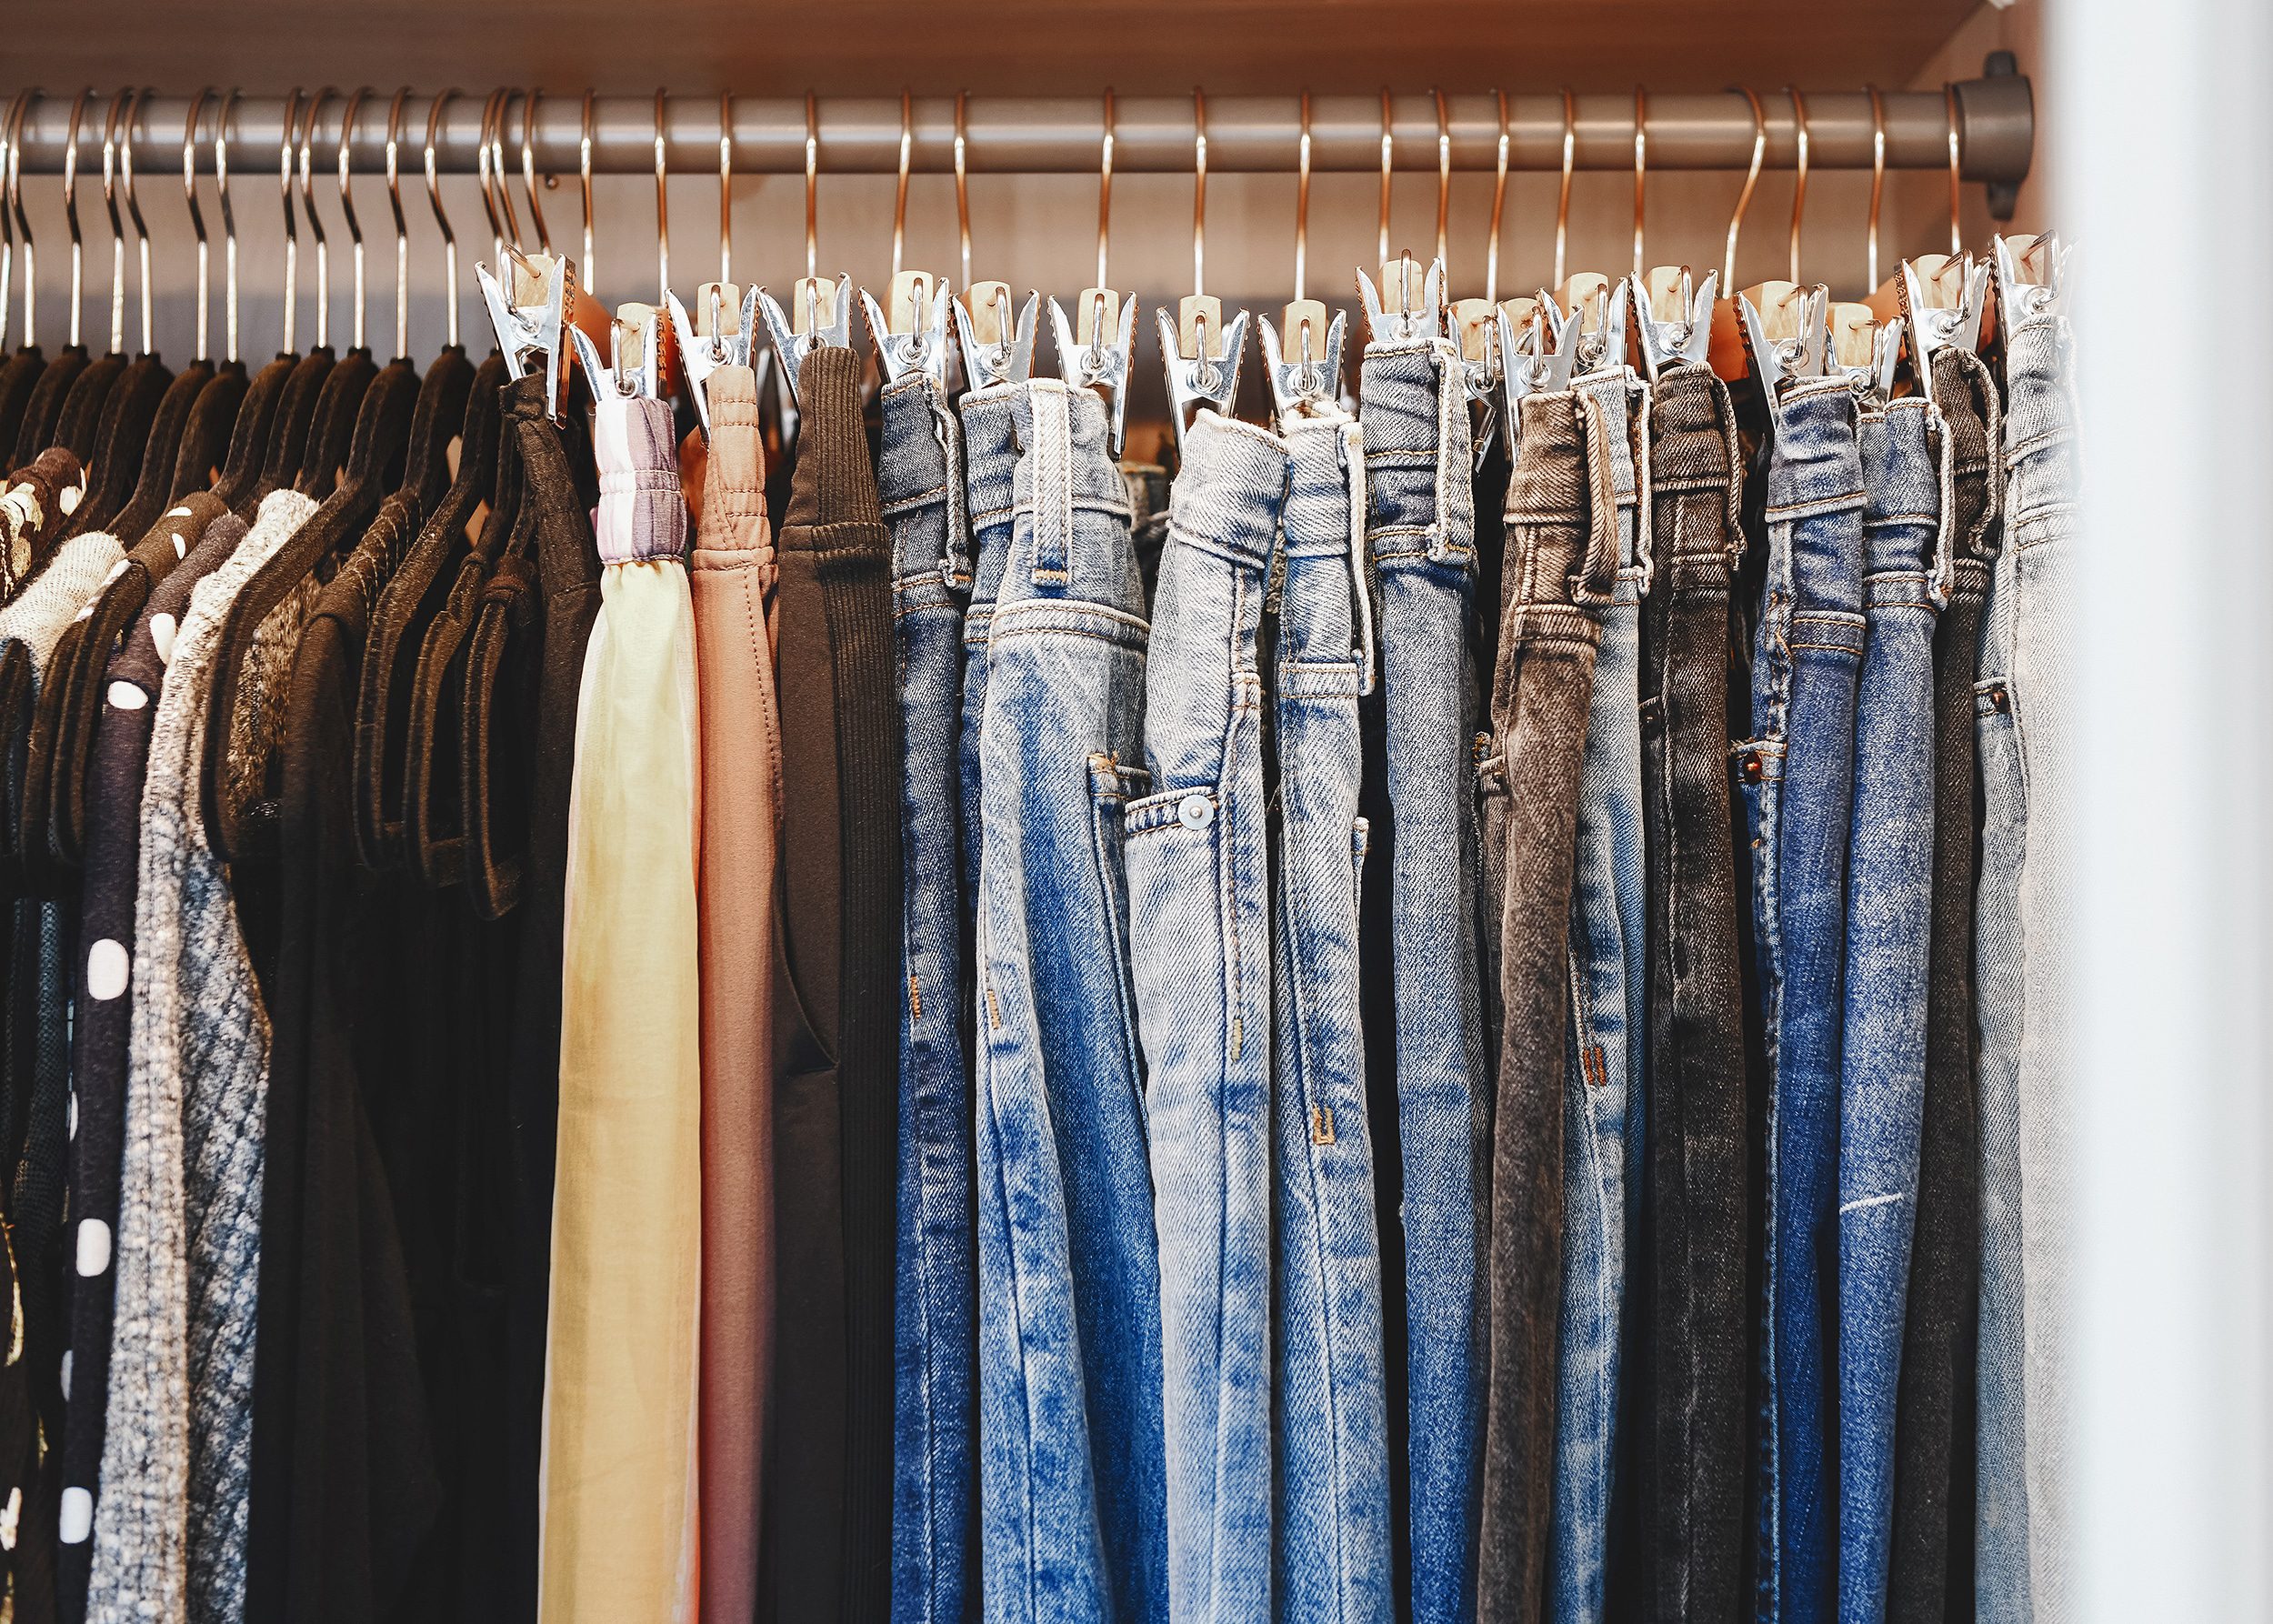 A row of clothing neatly organized in a closet, jeans hanging from pants hangers | via Yellow Brick Home